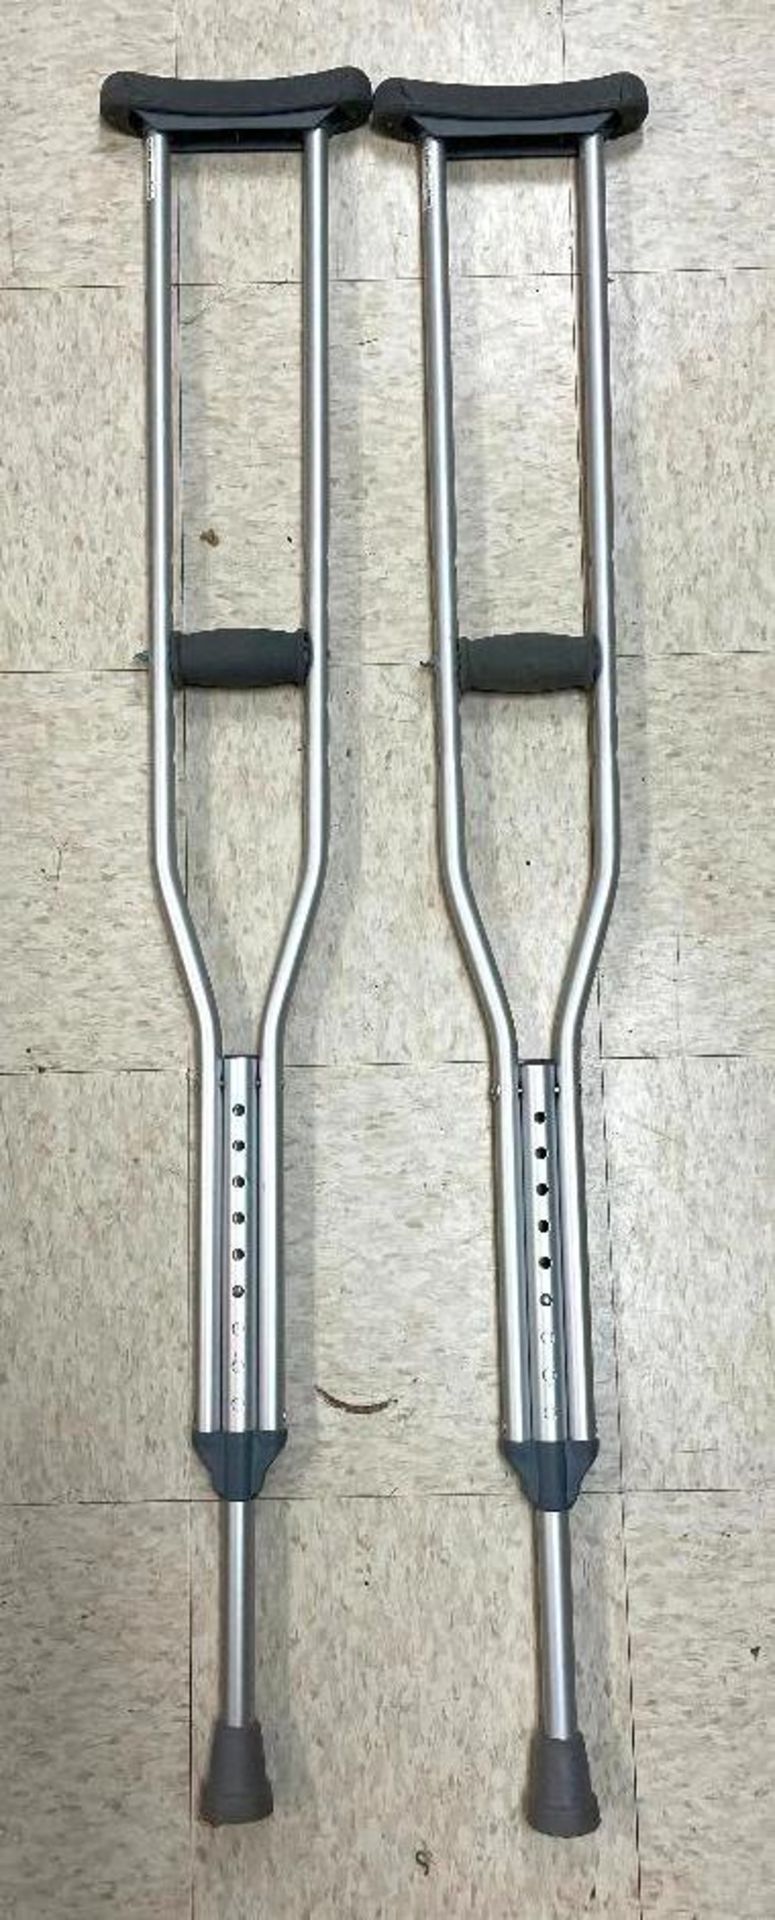 DESCRIPTION: (4) - PAIRS OF MEDICAL CRUTCHES ADDITIONAL INFORMATION: SOLD AS SET. THIS LOT IS: ONE M